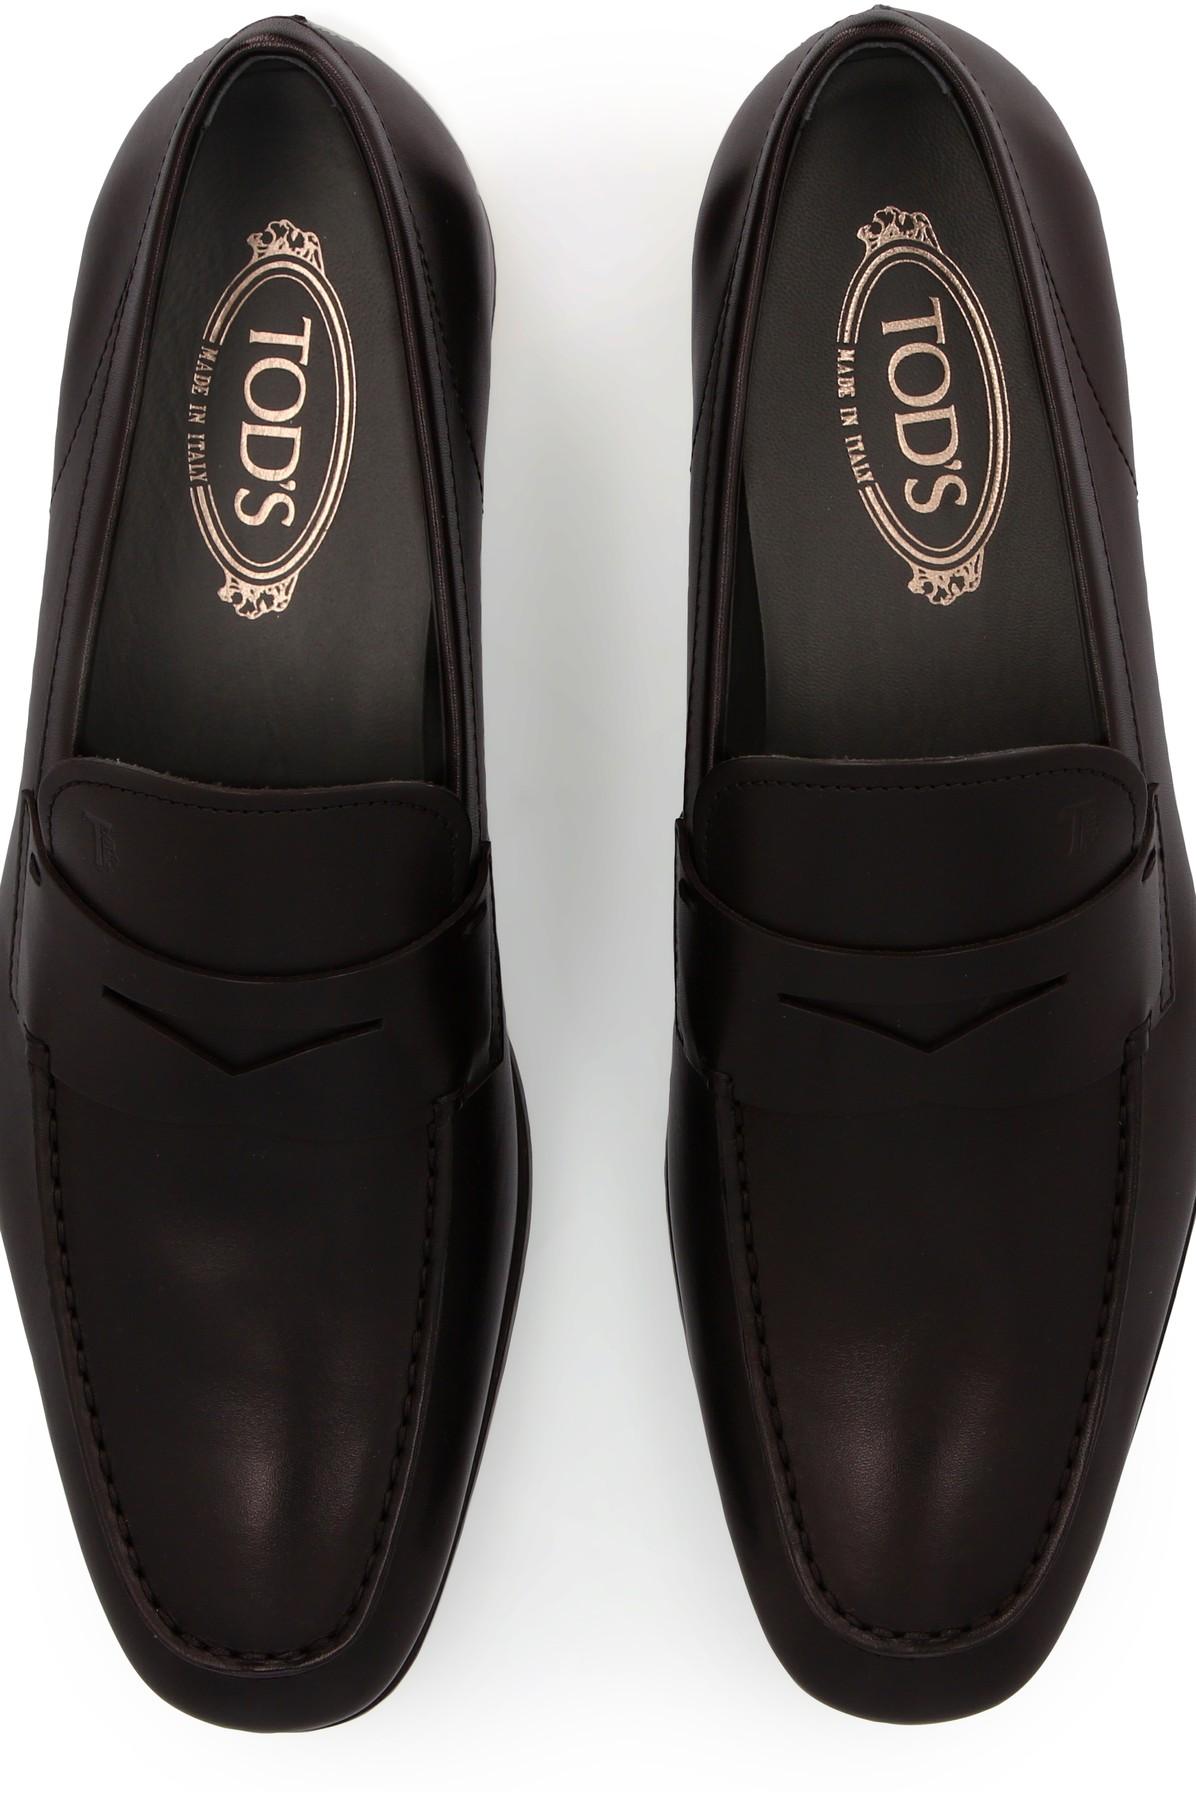 tod's gomma